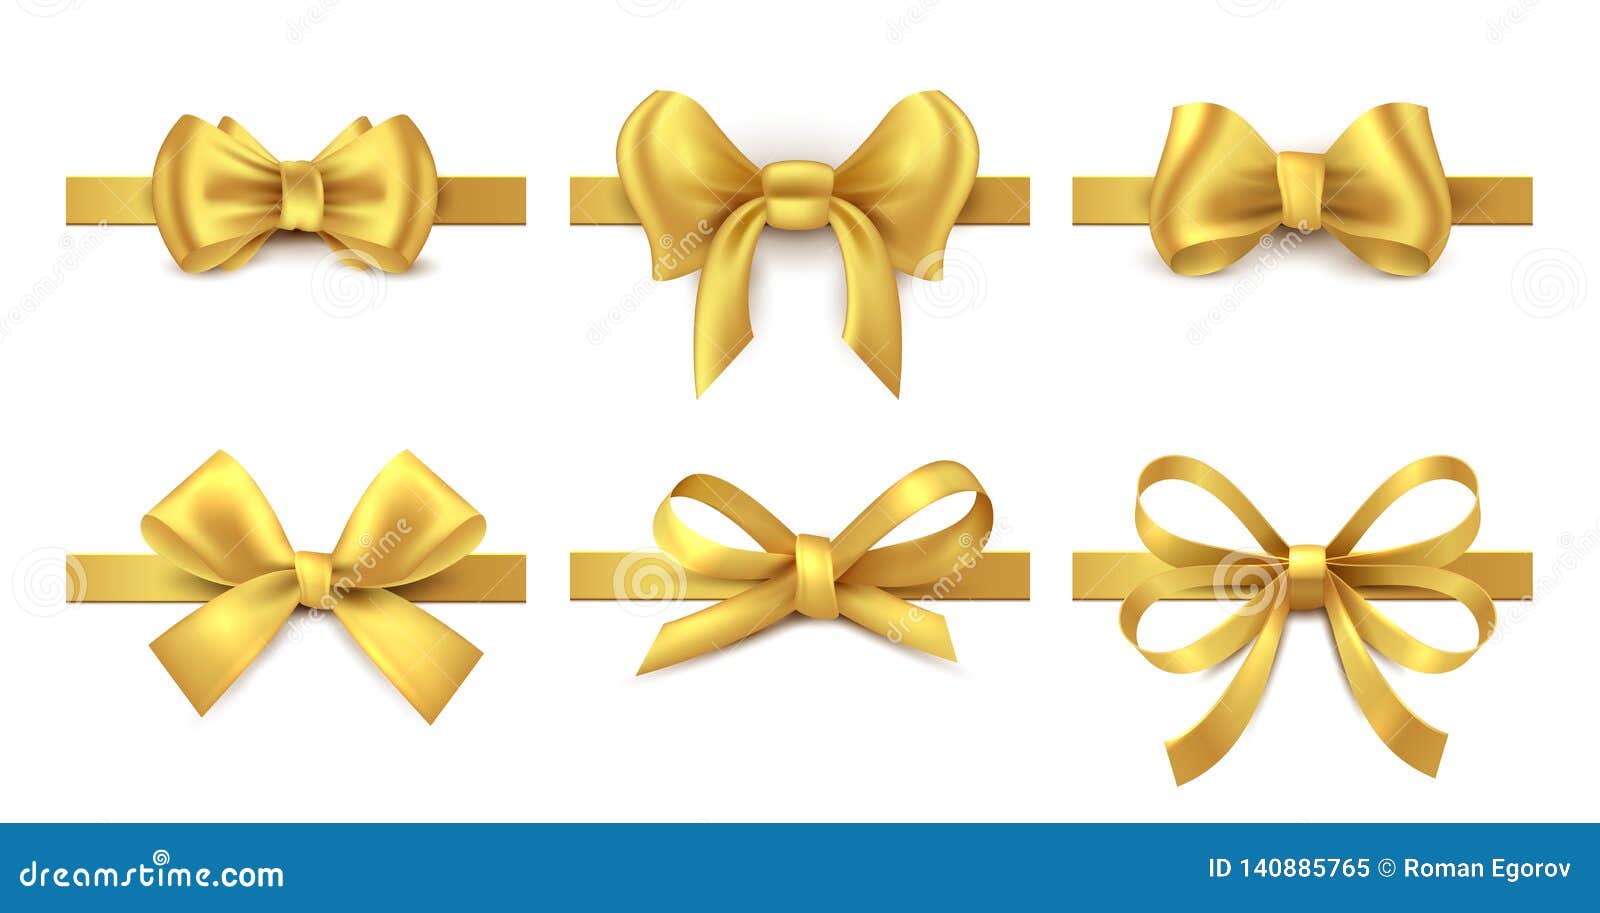 golden ribbon bow. holiday gift decoration, valentine present tape knot, shiny sale ribbons collection.  gold bows